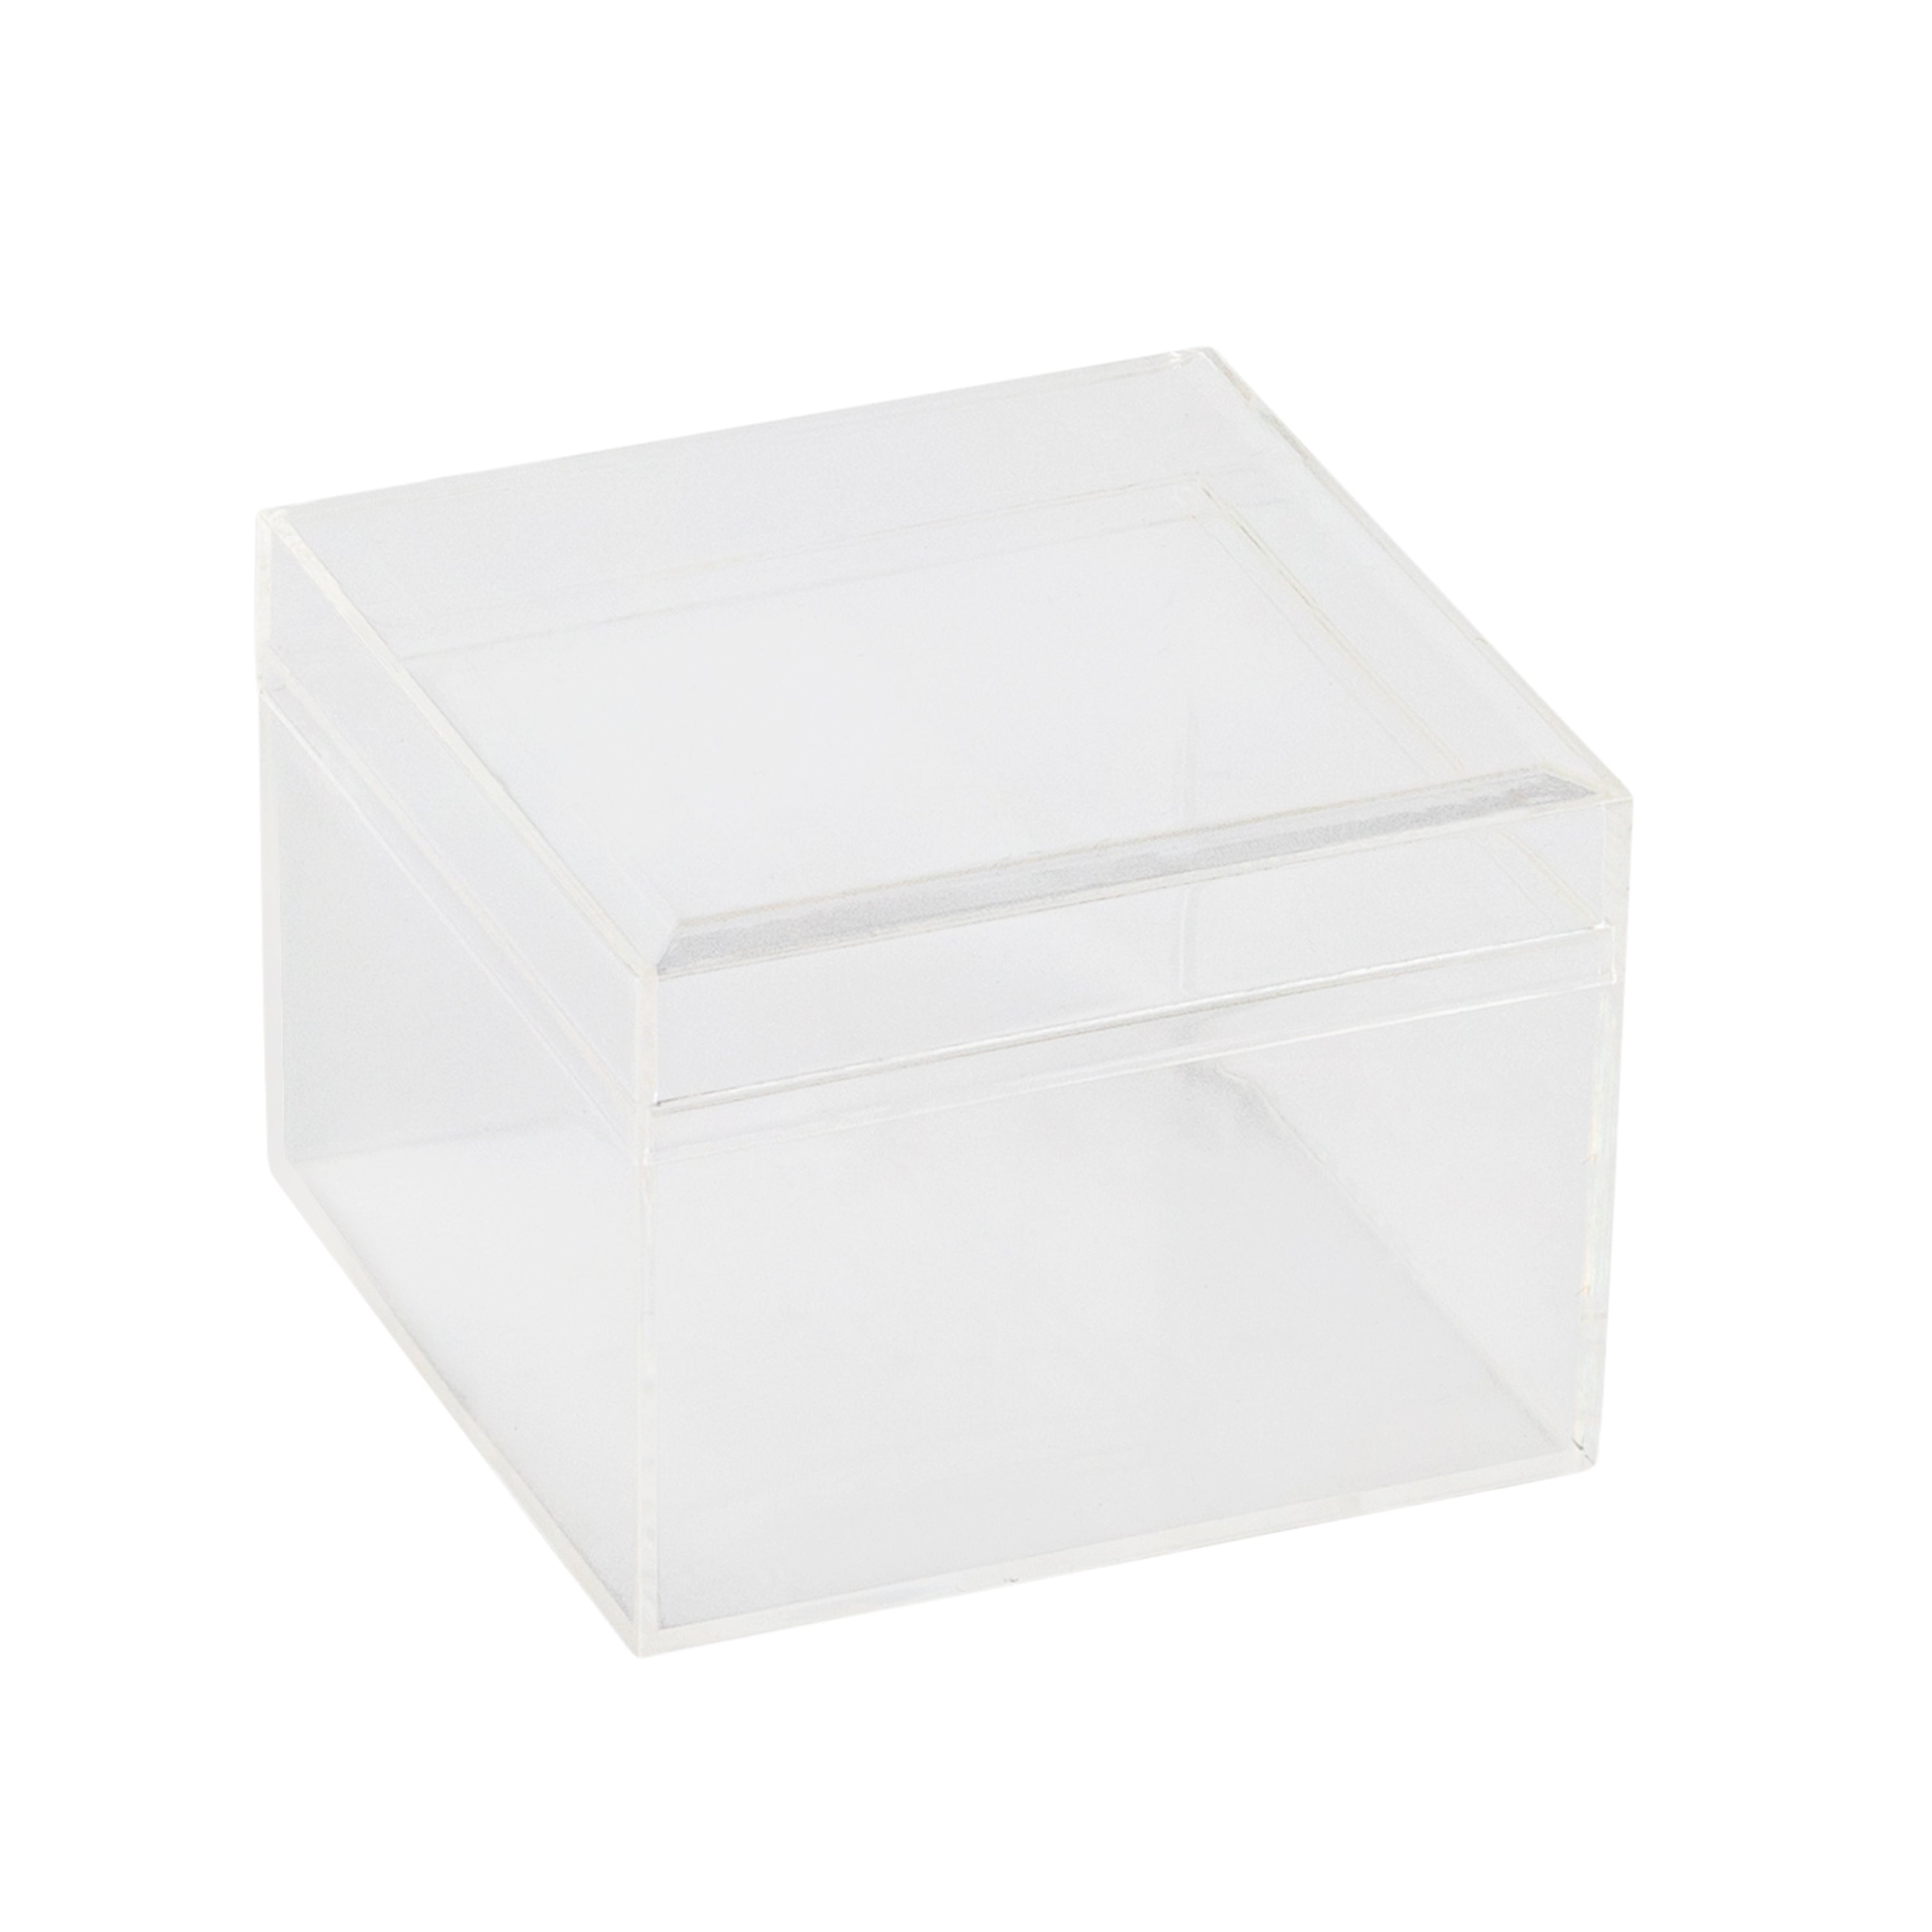 Hammont Clear Acrylic Boxes with Lid- 1 Pack, 5.875x5.875x5.875 Inches,  Lucite Cube Display Case for Collectibles, Storage for Small Items and  Jewelry